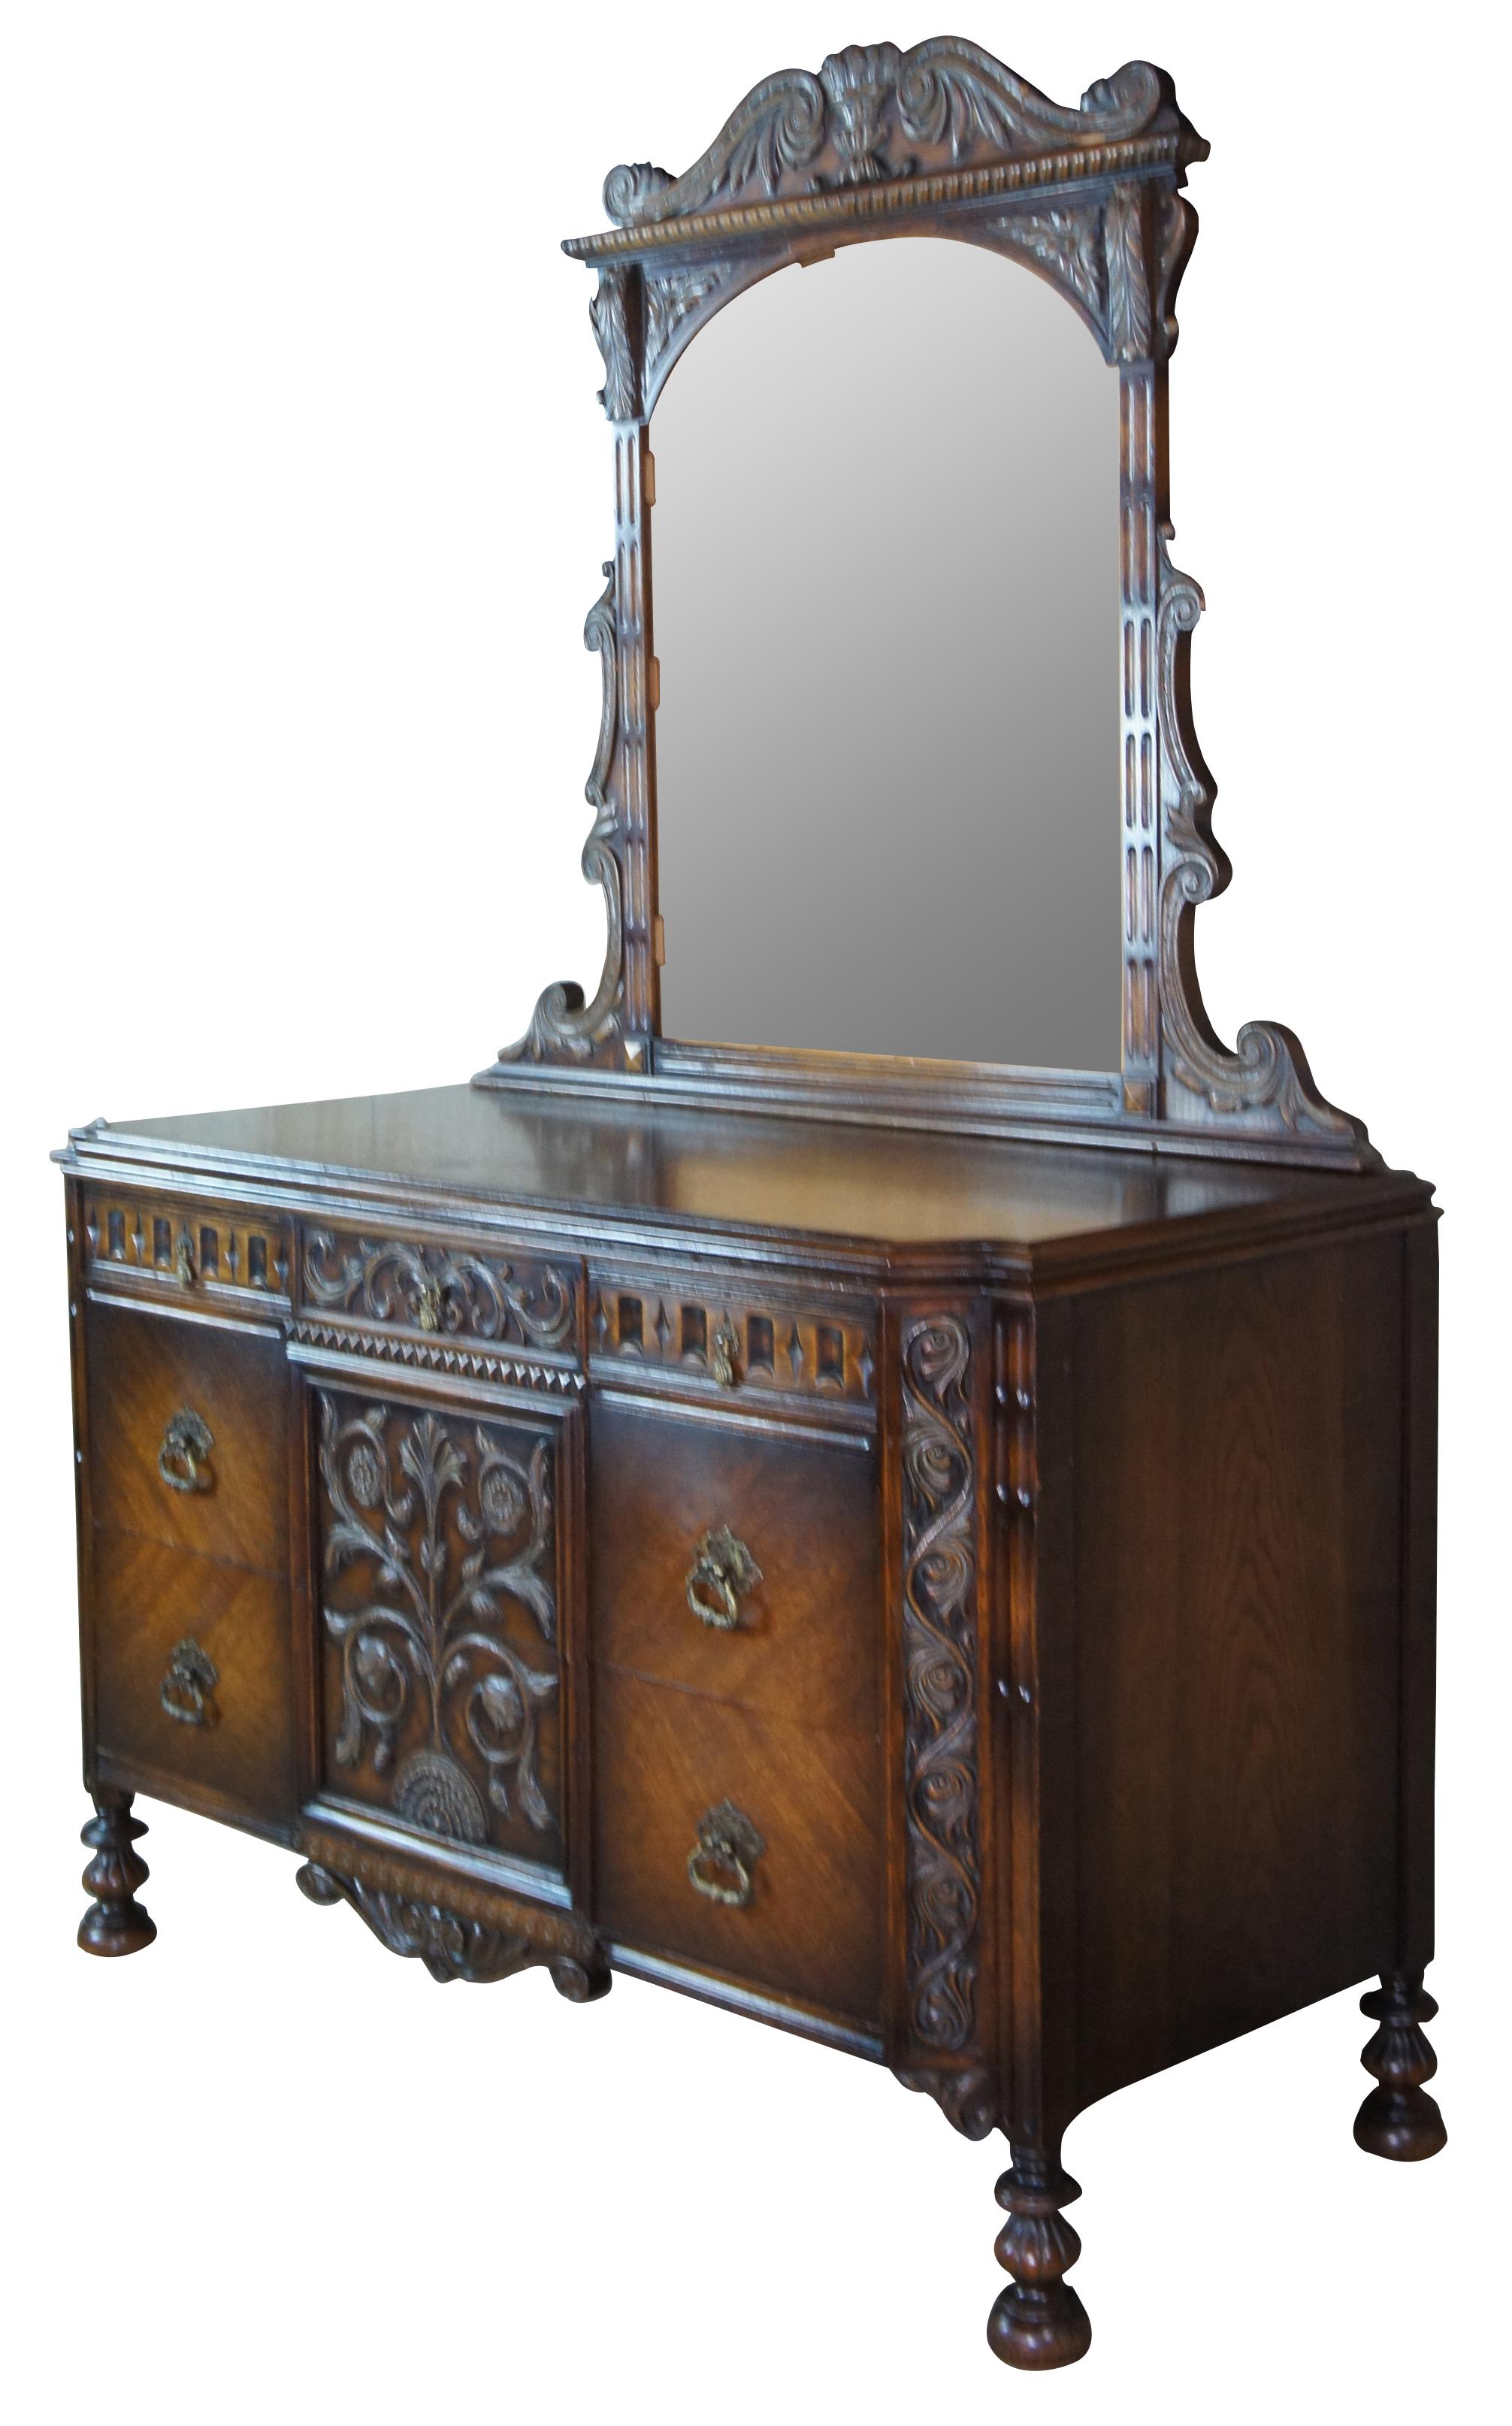 American Furniture Company Gothic or Spanish Renaissance Revival vanity dresser or chest of drawers. Made from american oak with low relief floral acanthus carvings, an arched and scrolled mirror, turned legs and bun feet. Includes five drawers.